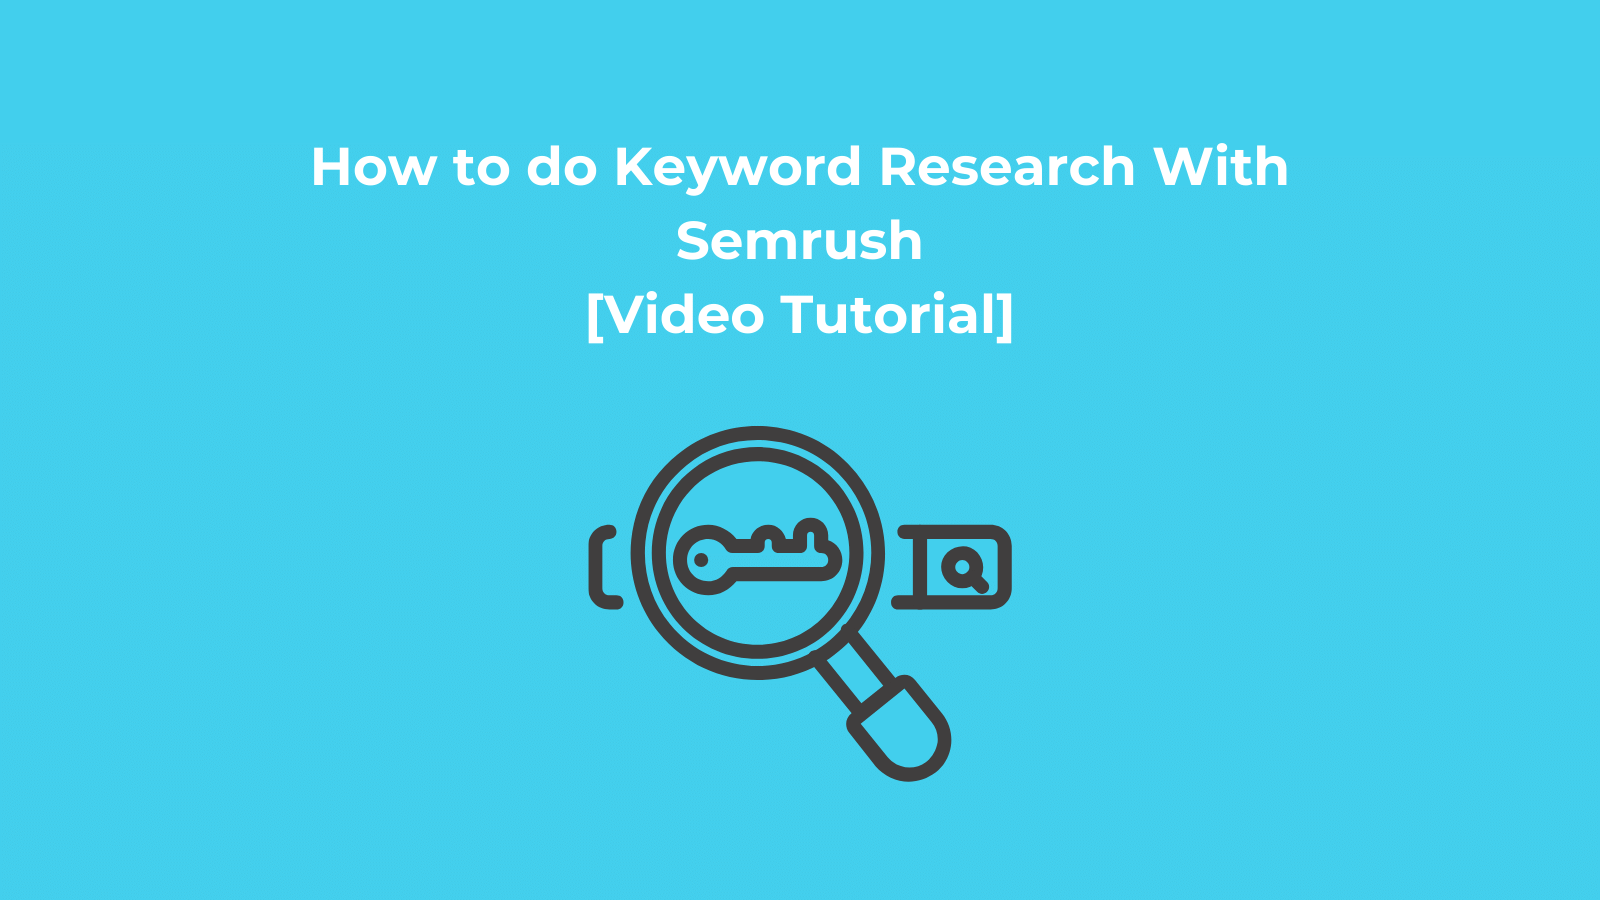 How to do Keyword Research With Semrush [Video Tutorial]